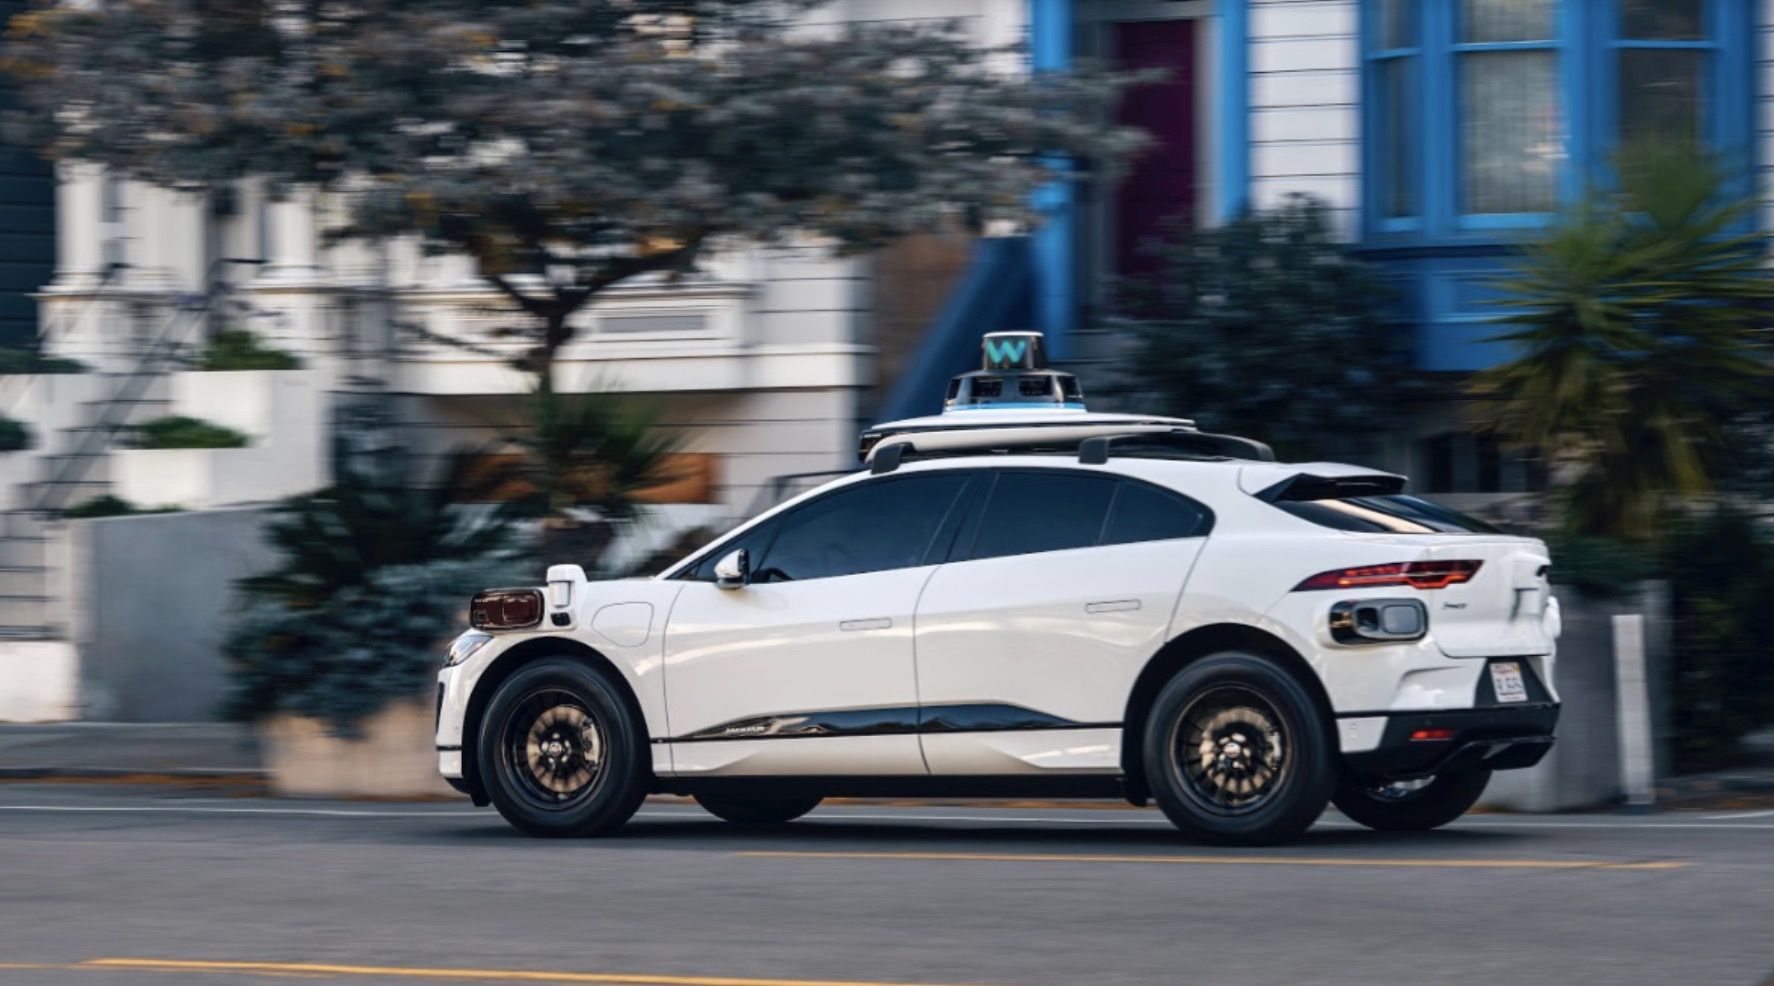 Waymo unveils the fifth-generation Waymo Driver for self-driving car.